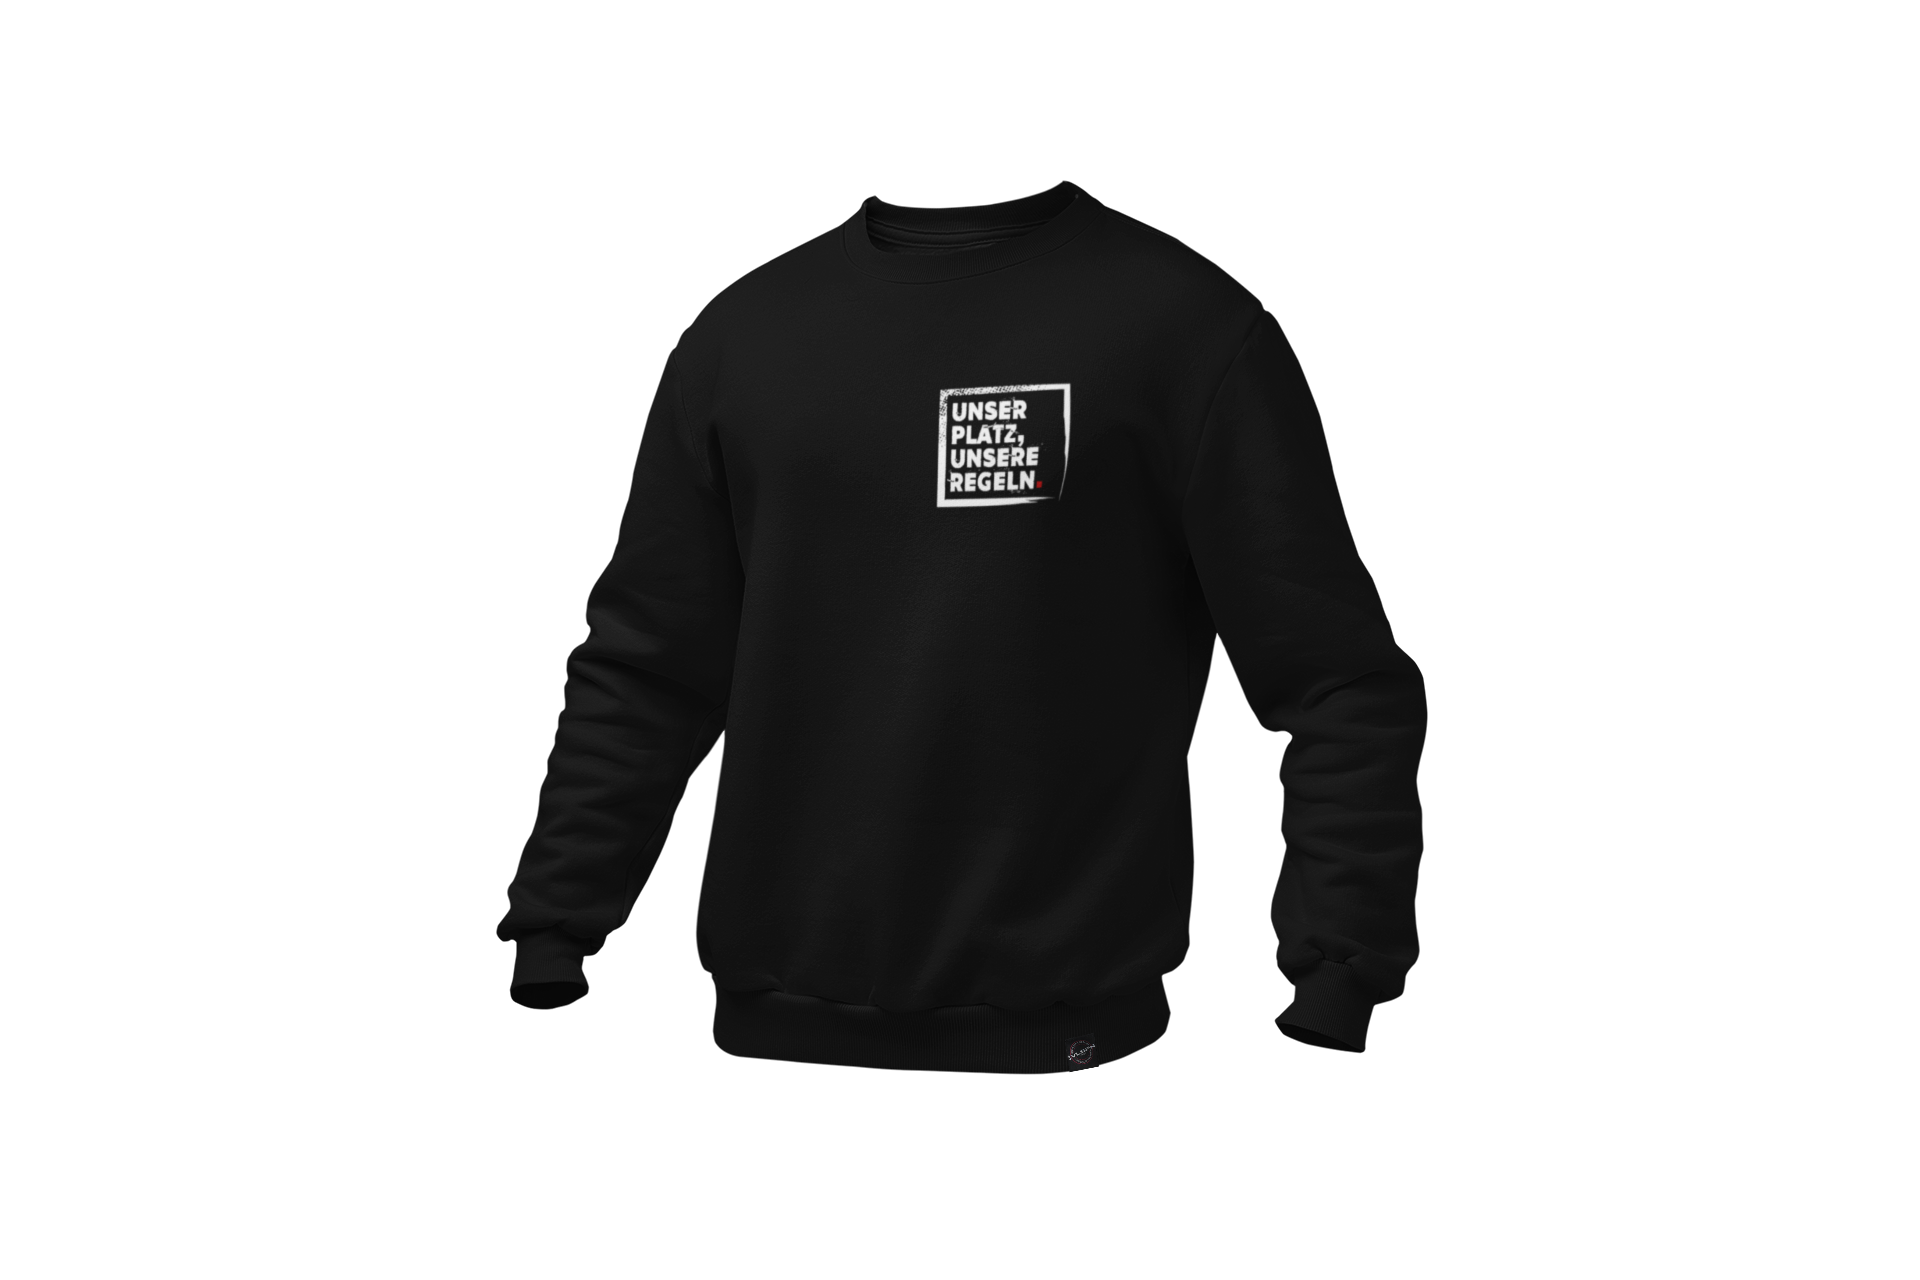 mockup-of-a-ghosted-crewneck-sweatshirt-over-a-solid-background-26960 - 2021-02-09T161306.452.png